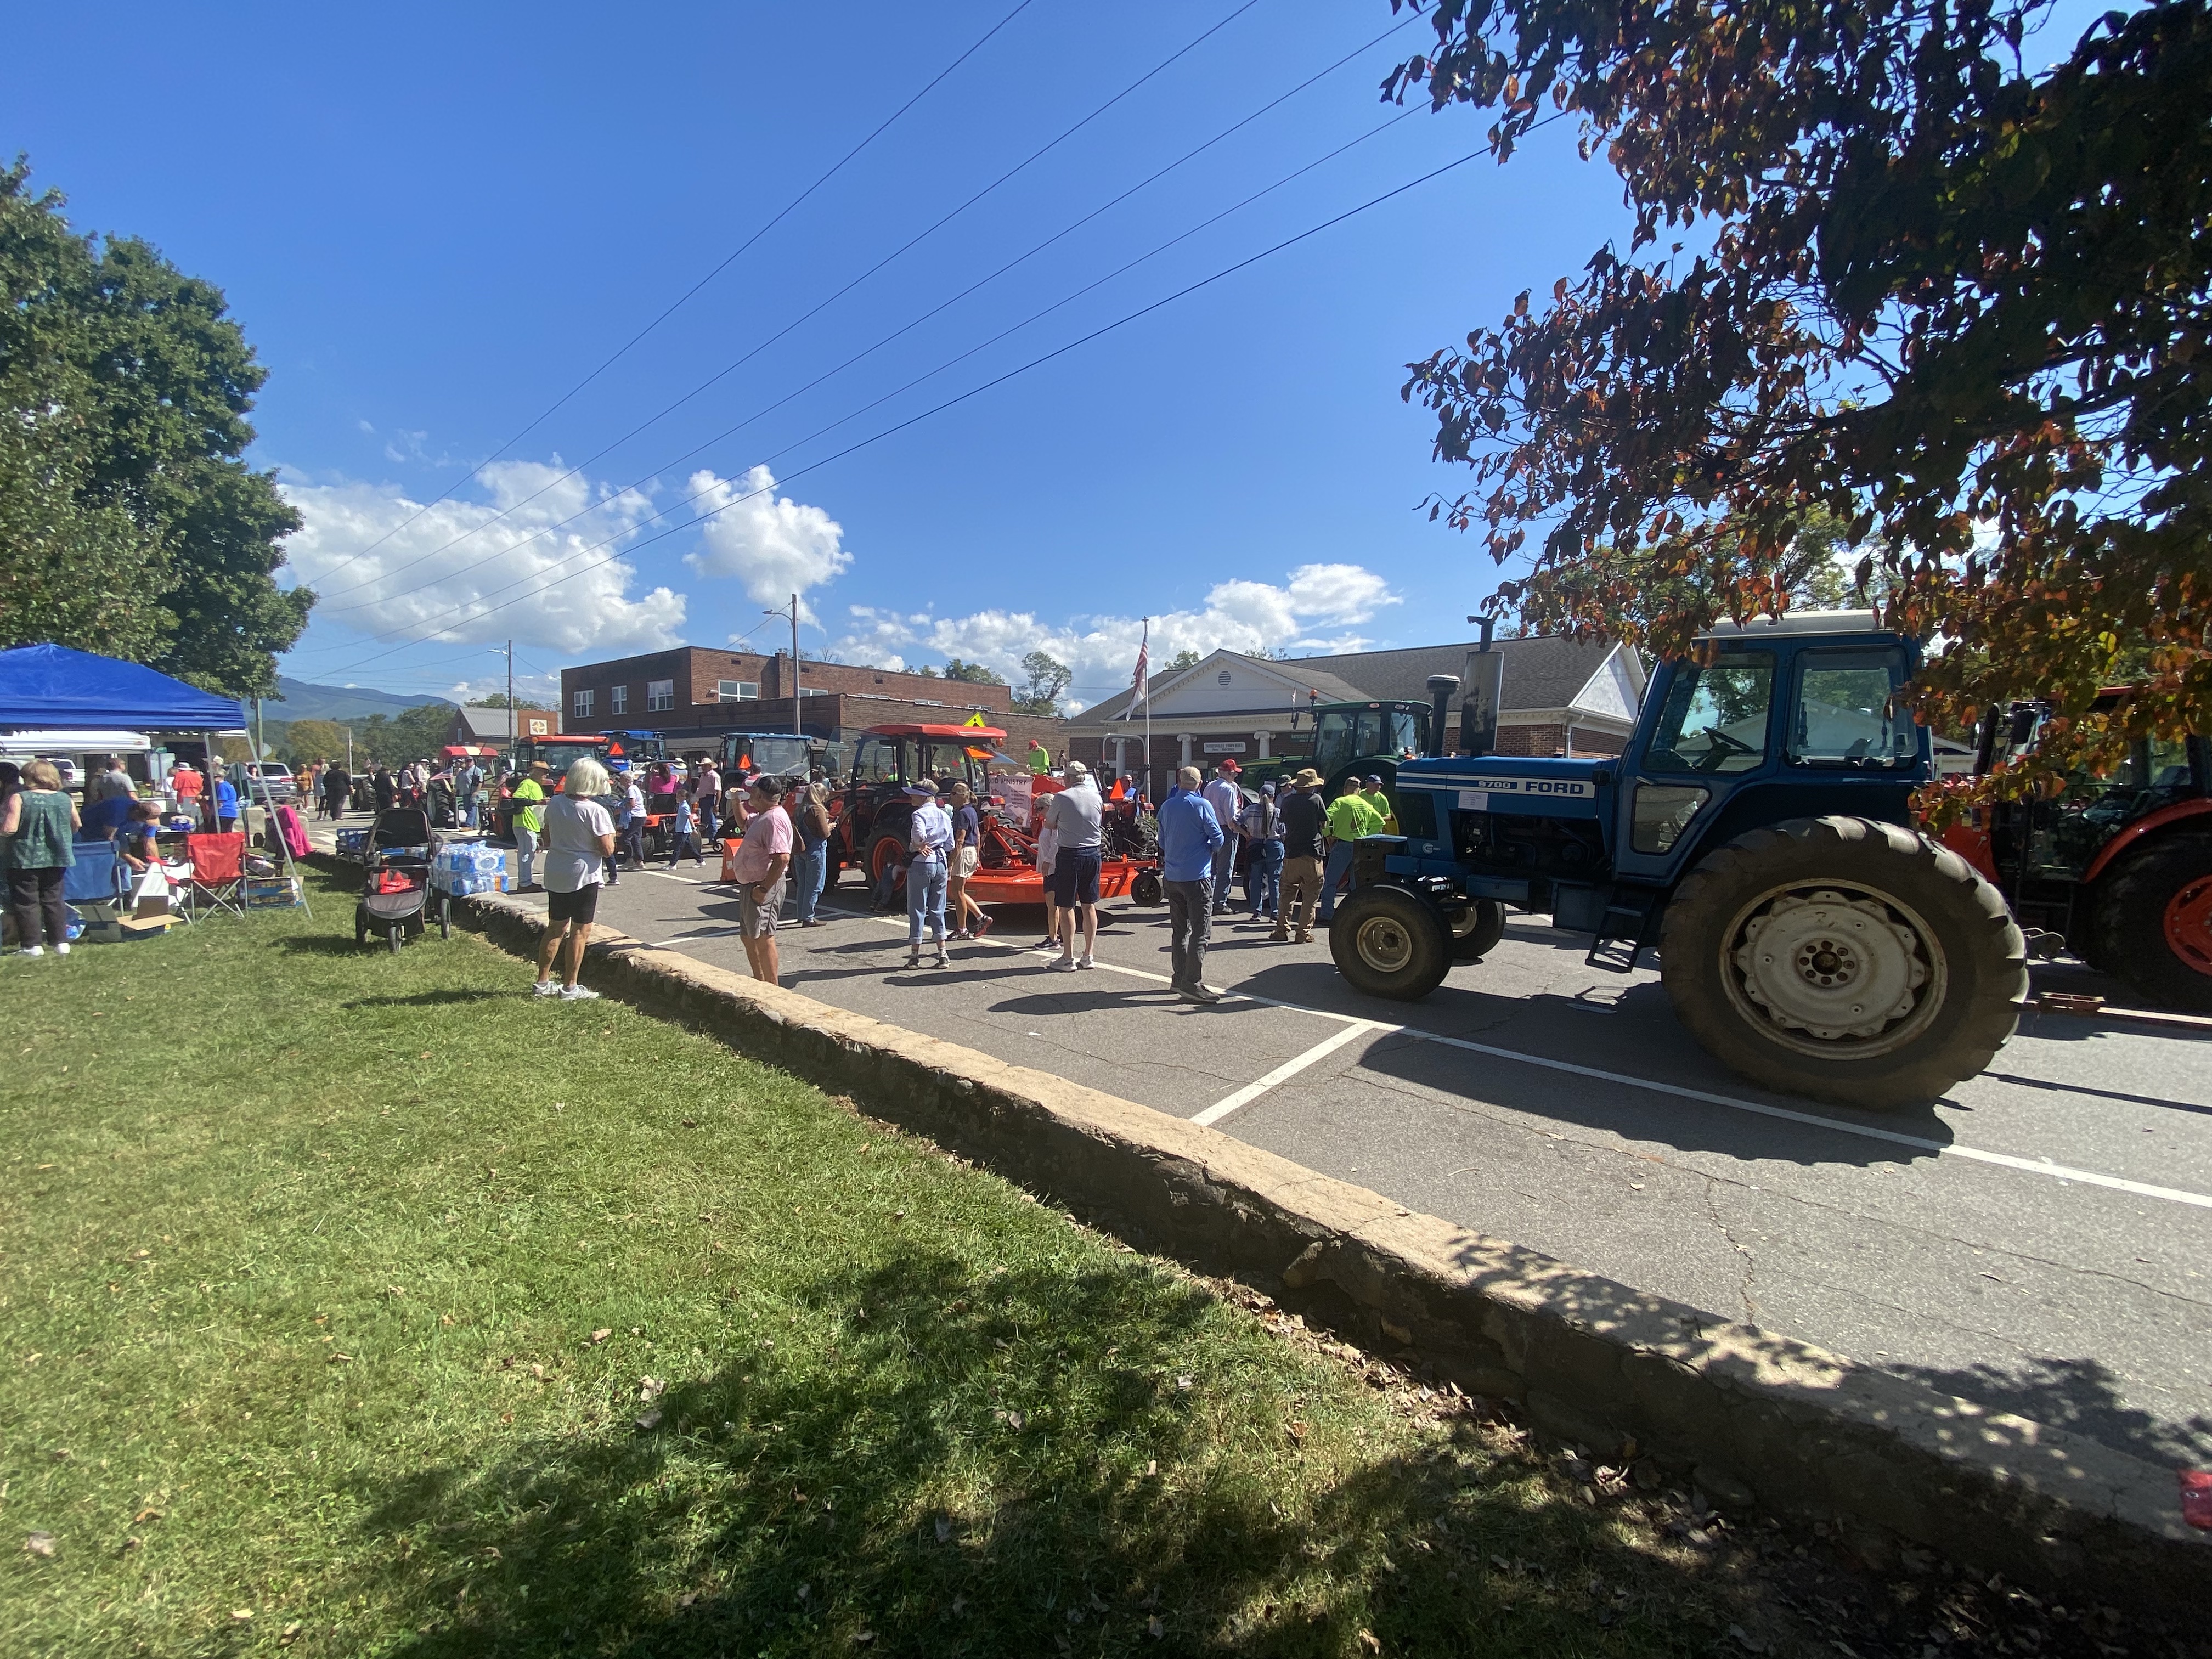 crowd with tractors in street